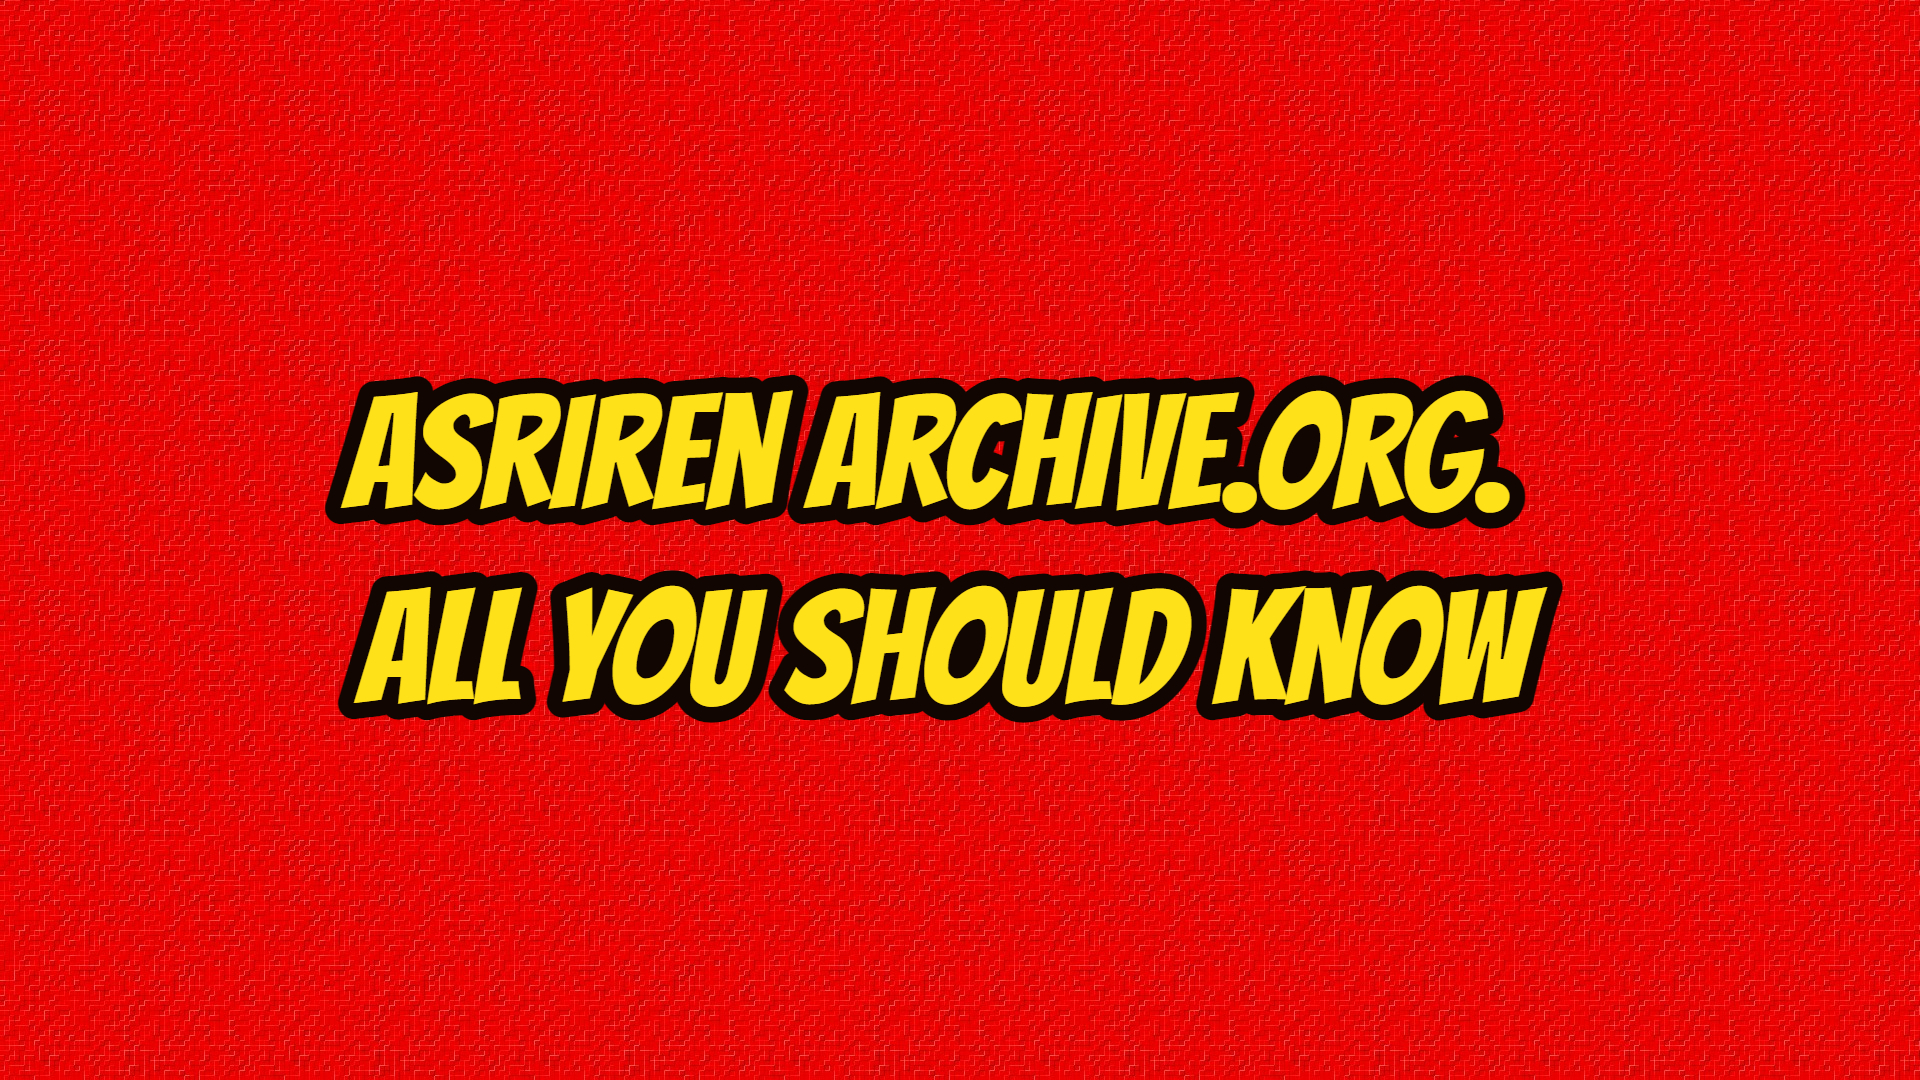 What is Asriren archive.org